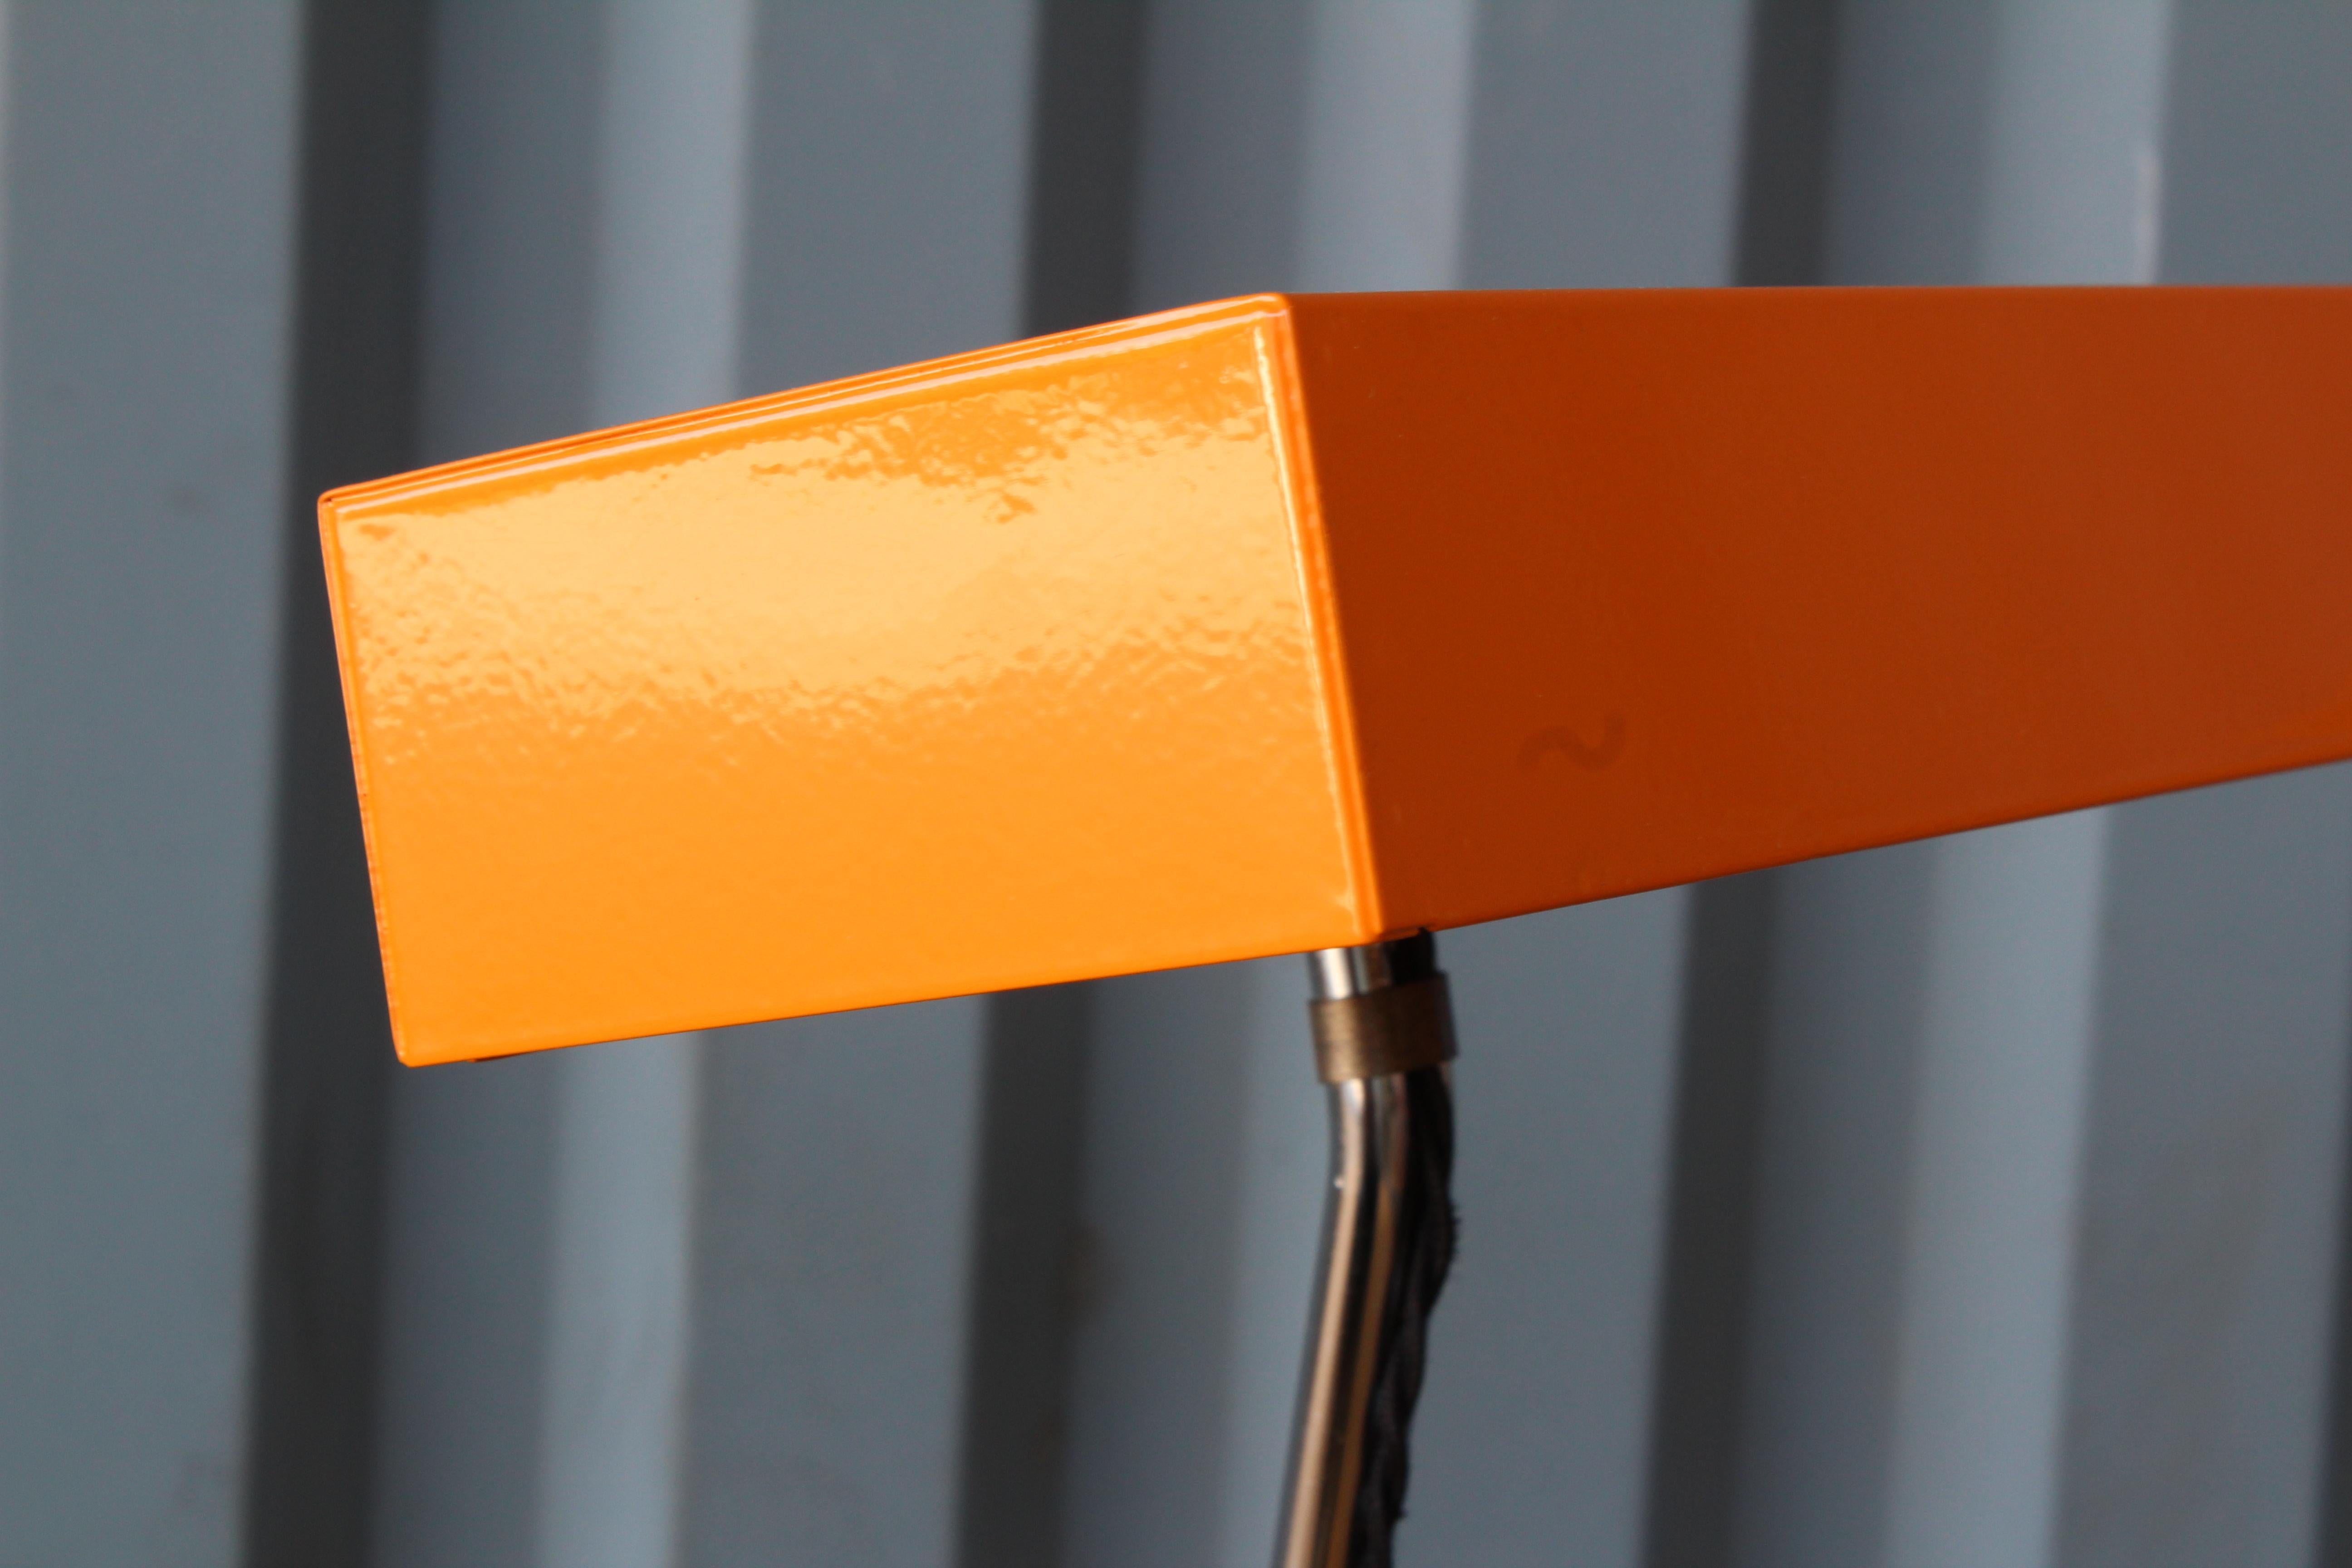 1960s modern desk lamp with an orange metal shade. Newly rewired.